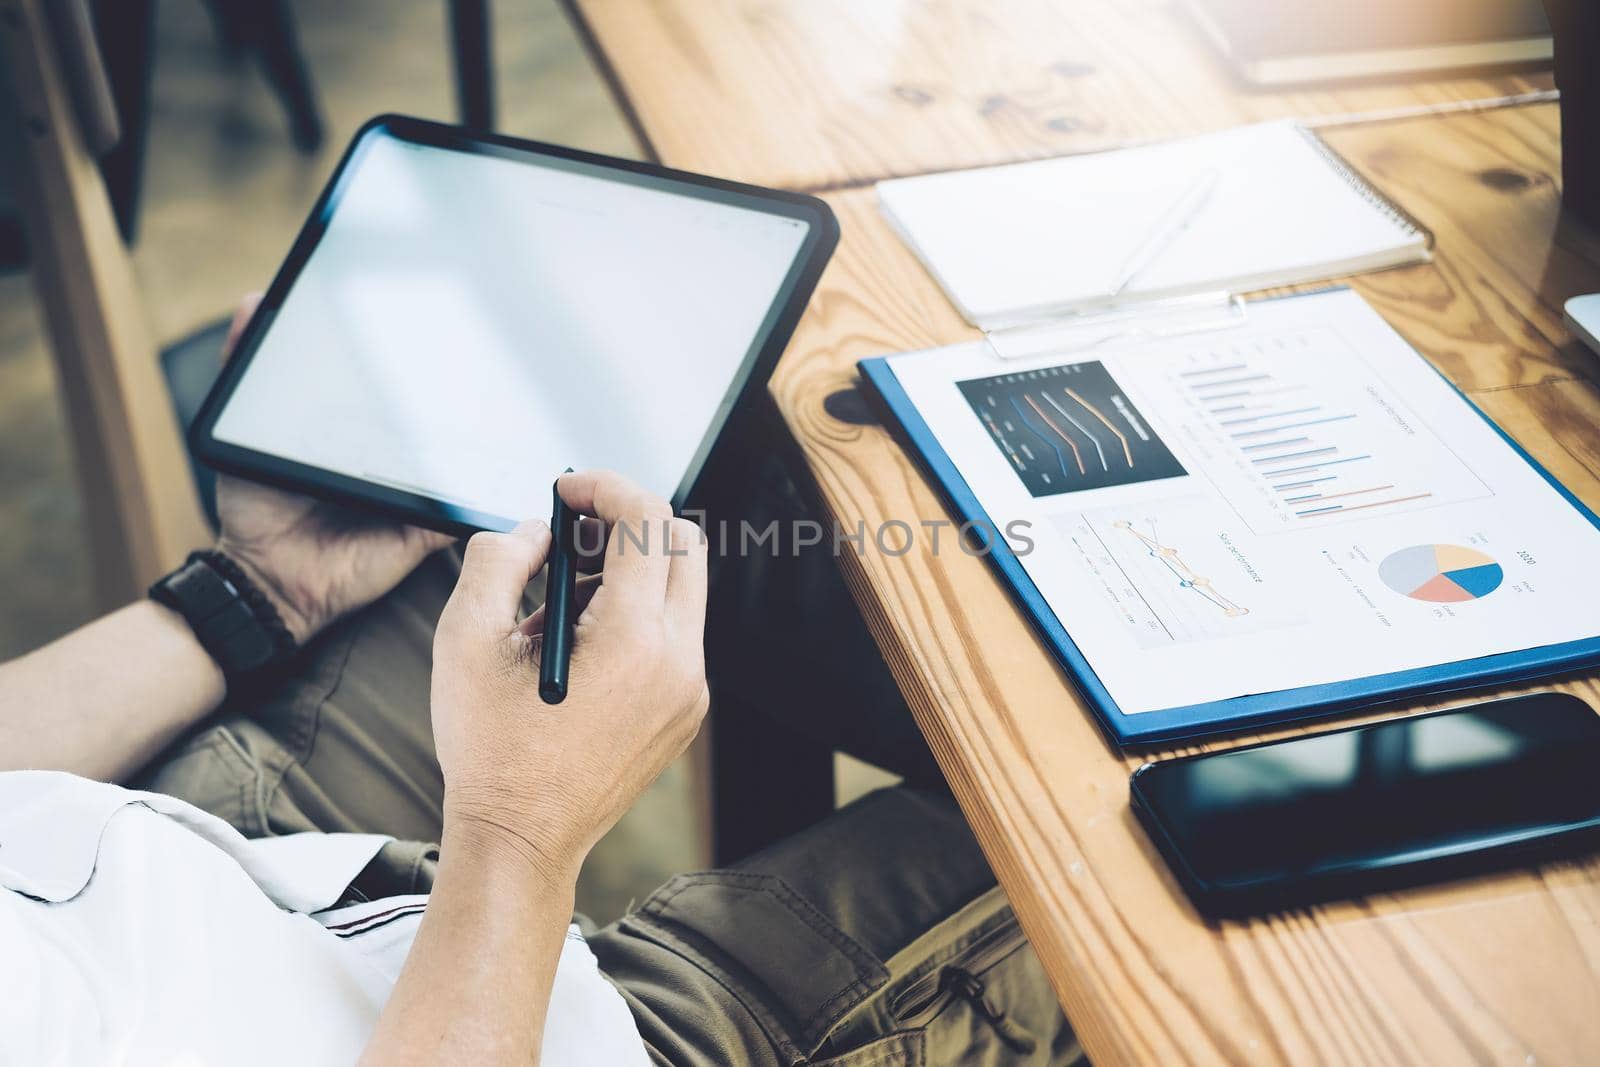 Financial Freedom, a stock analyst holding a pen pointing at a tablet Analyze the stock market to make a profit for your own portfolio. by Manastrong